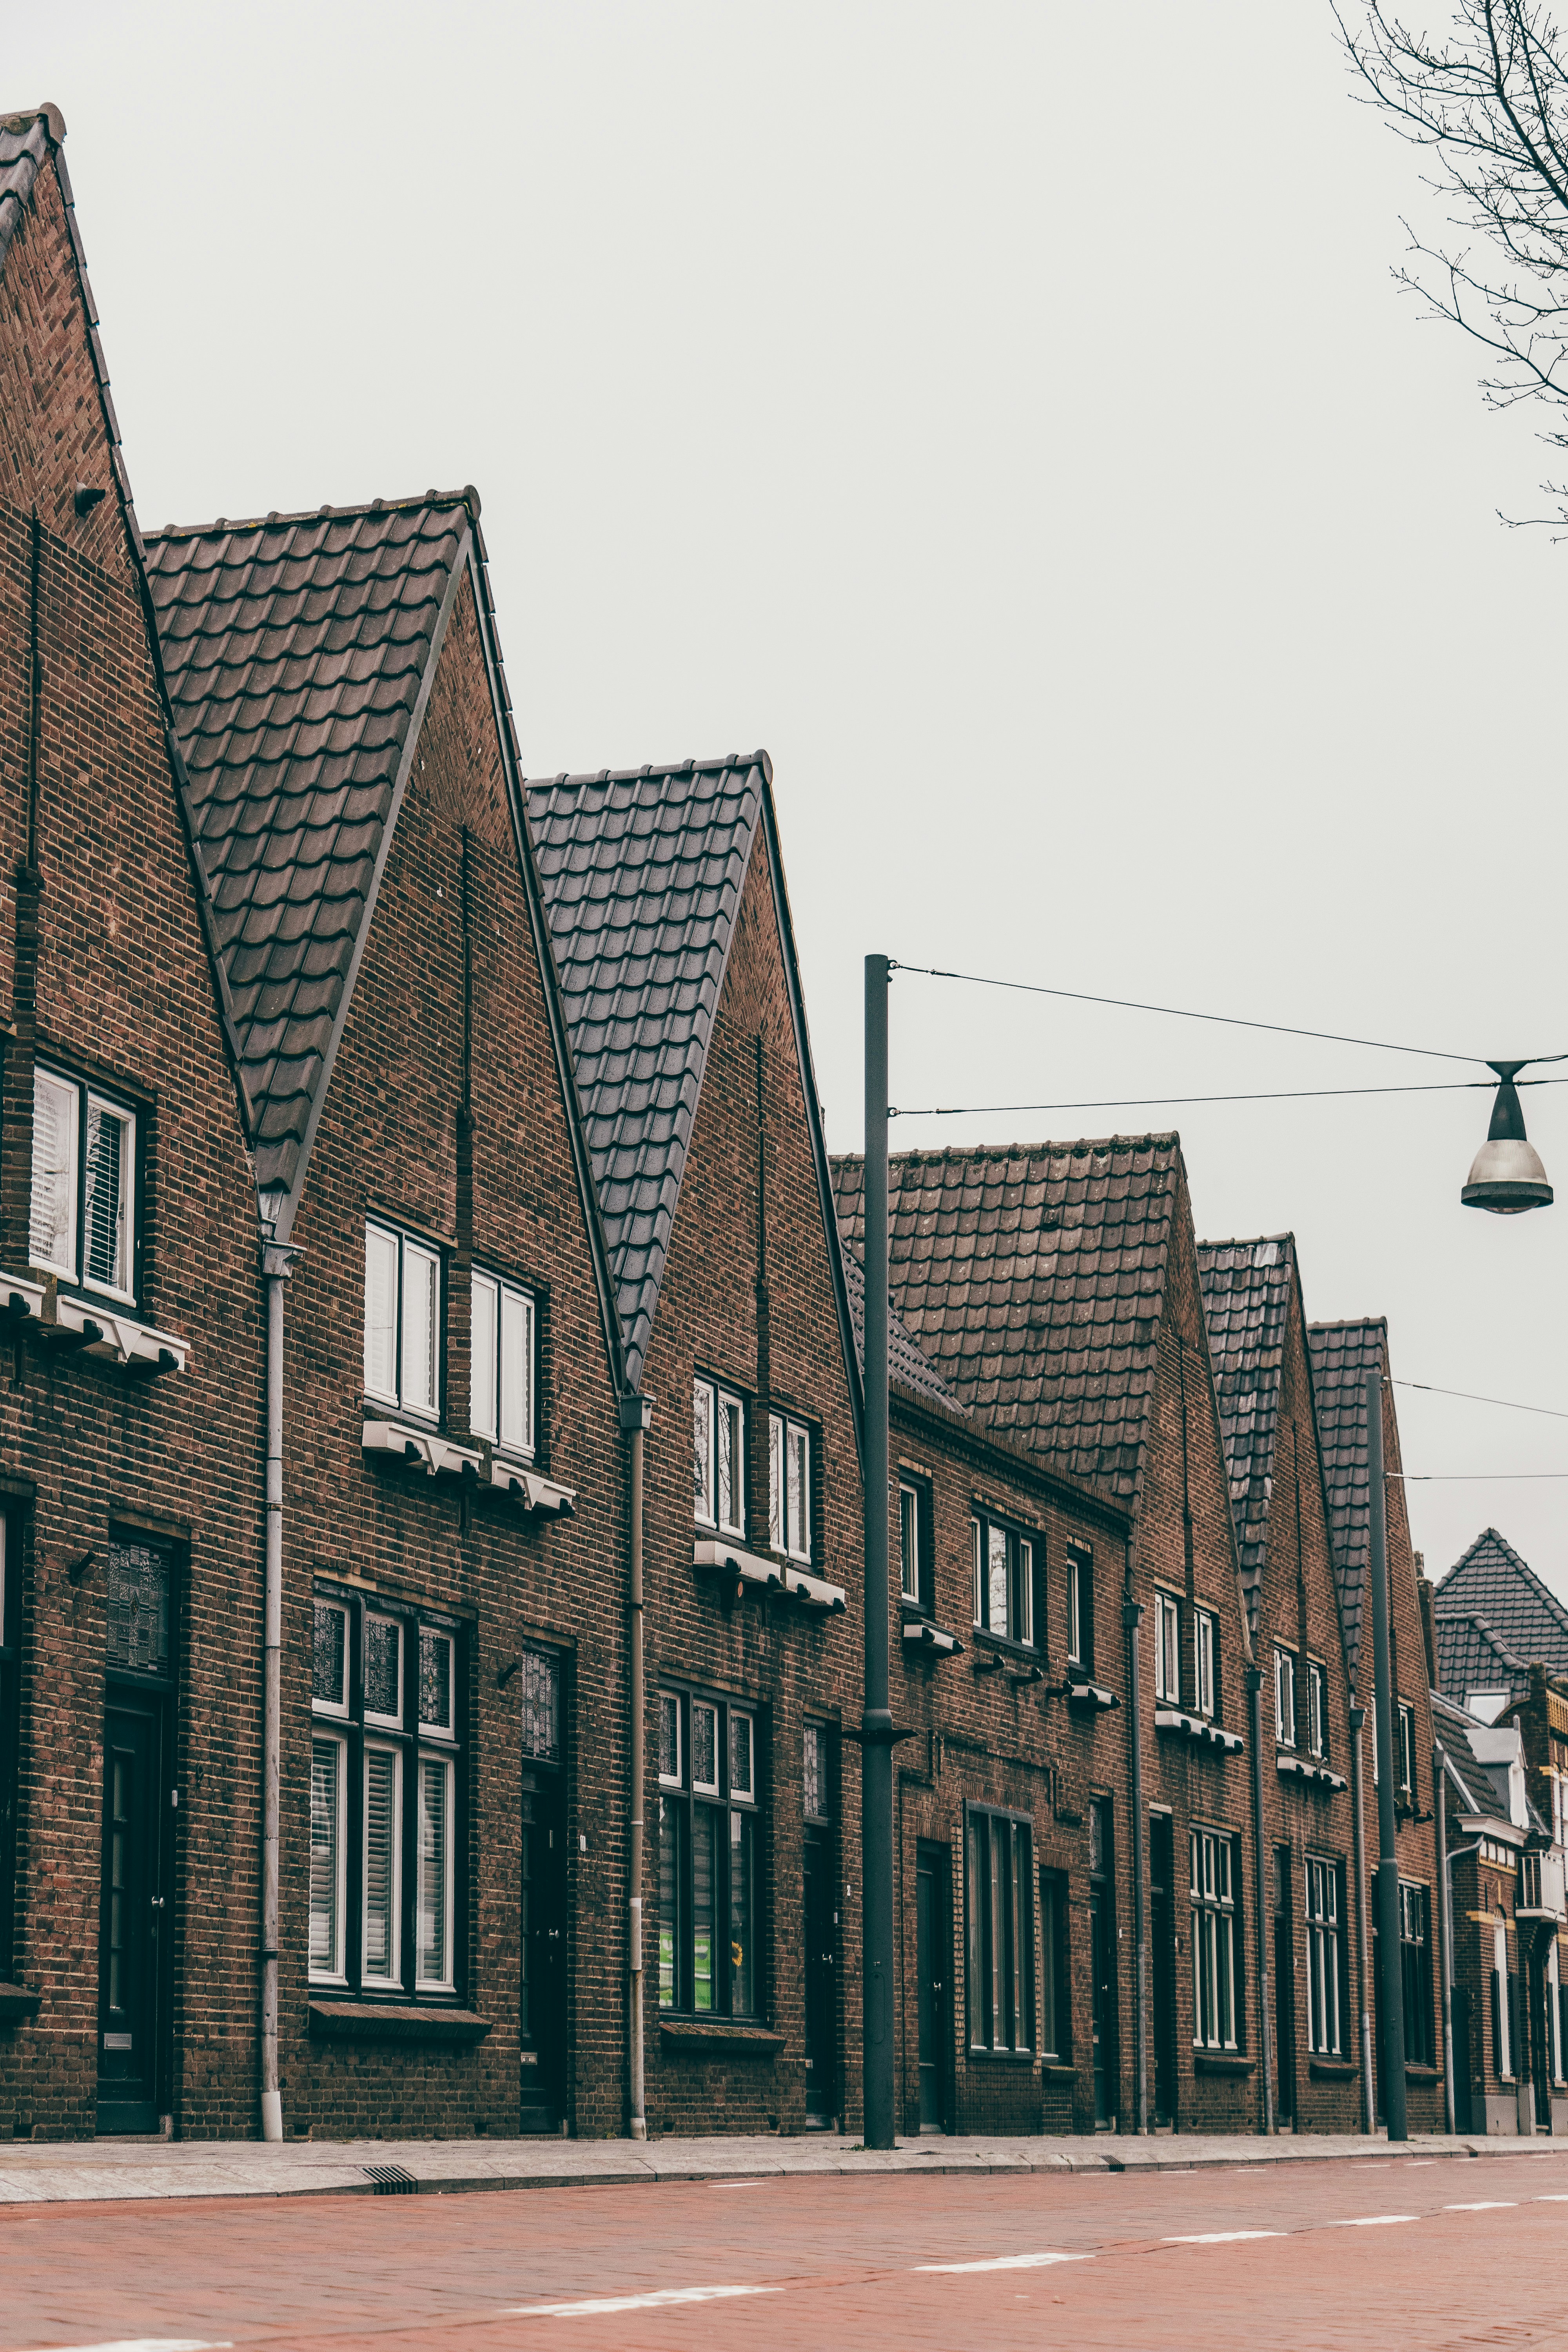 Houses on empty street of Best, Eindhoven, Netherlands